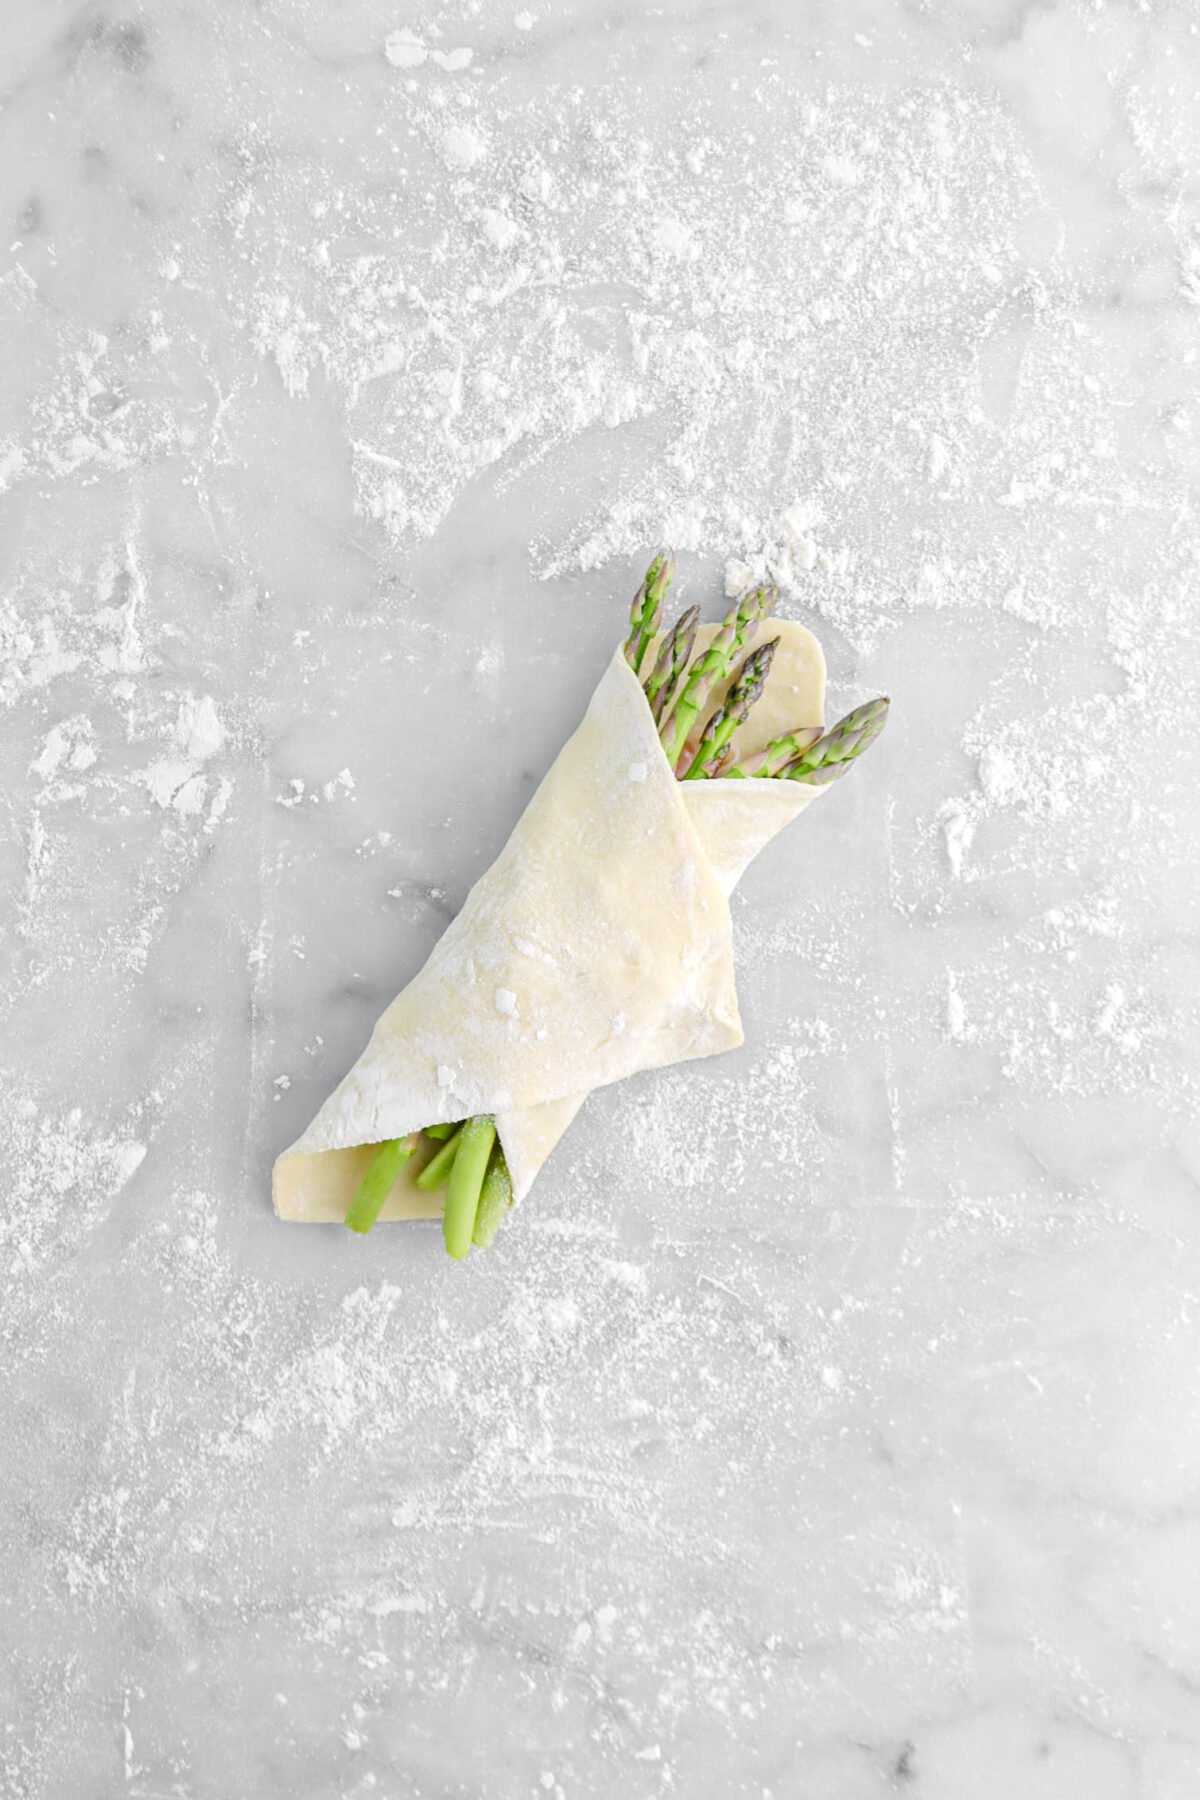 puff pastry wrapped around asparagus on marble surface.